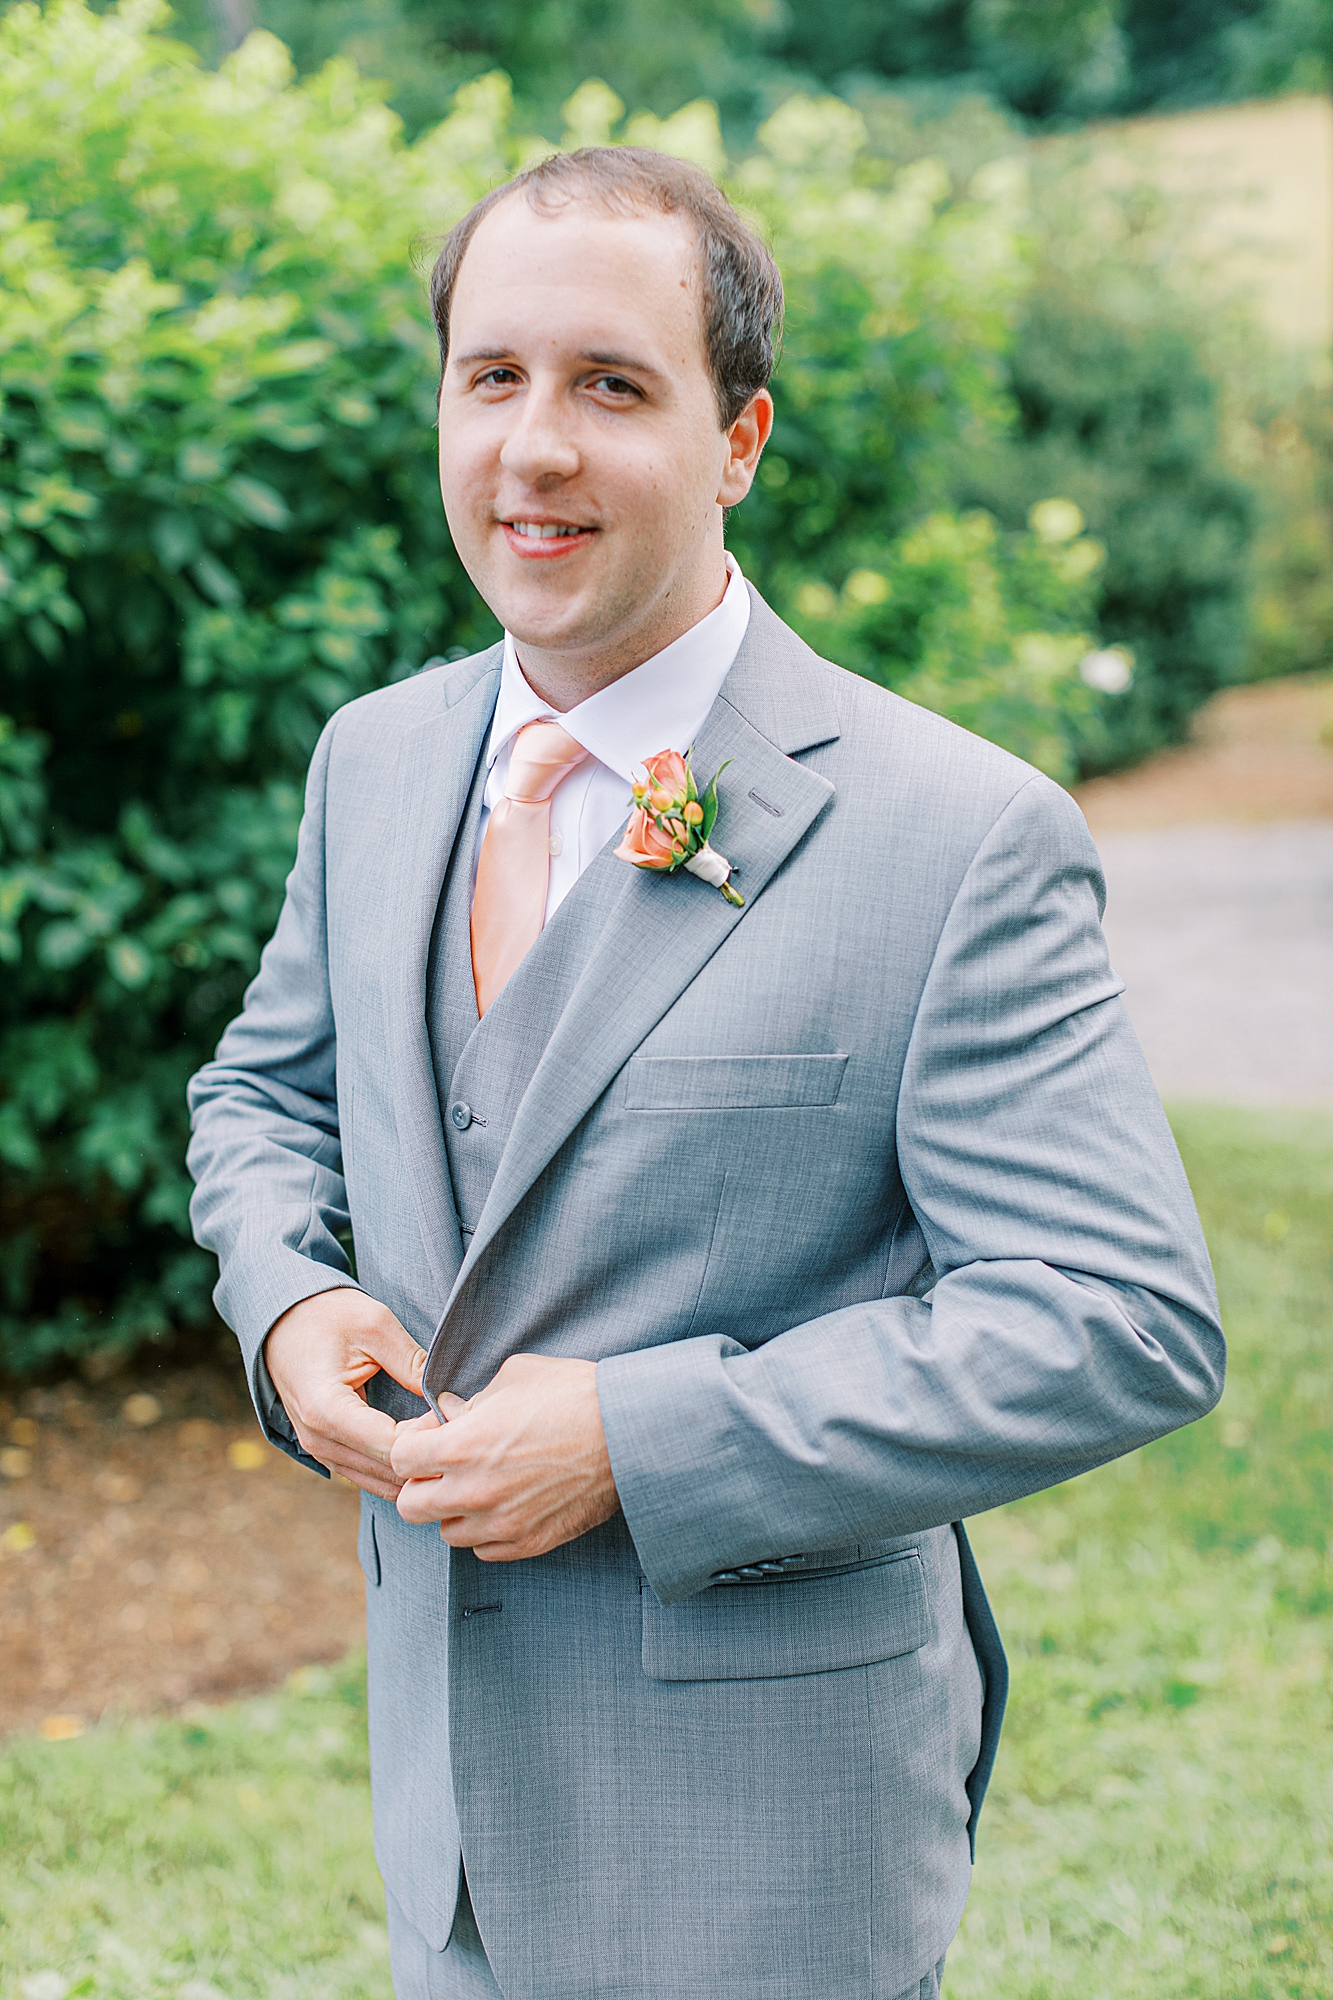 Groom buttoning suit.